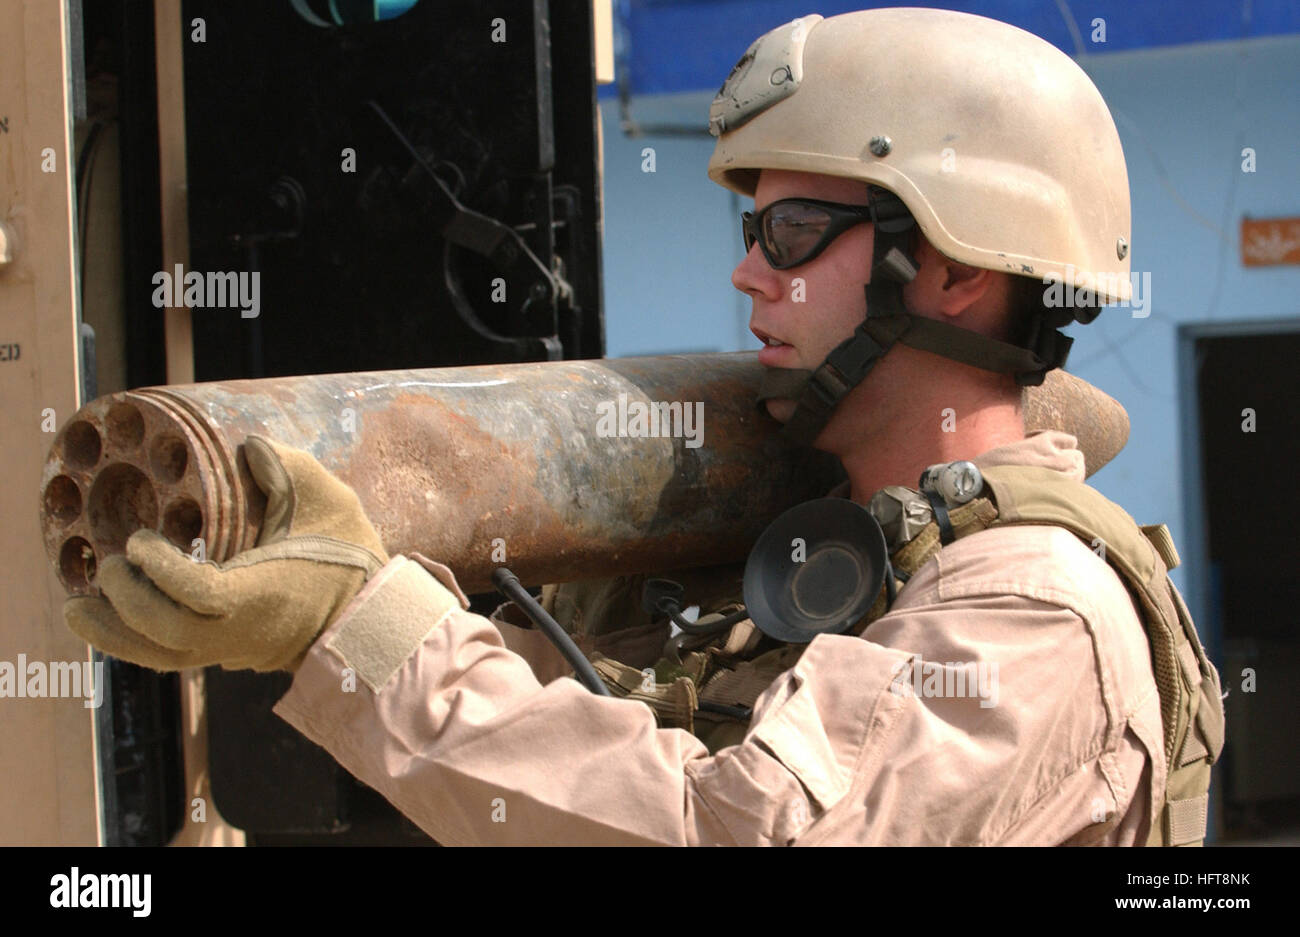 061030-F-7426P-311 Ad Diwaniyah, Iraq (Oct. 30, 2006) - U.S. Navy Explosive Ordnance Technician 1st Class Donnie Walkey, assigned to Explosive Ordnance Disposal Mobile Unit Three (EODMU-3), carries a 107 mm rocket out of the Iraqi police headquarters in Ad Diwaniyah, Iraq, for transport to Camp Echo. EODMU-3 responded to the Iraqi police headquarters to recover a cache of explosives found by policemen during a checkpoint vehicle search. U.S. Air Force photo by Tech. Sgt. Dawn M. Price  (RELEASED) US Navy 061030-F-7426P-311 U.S. Navy Explosive Ordnance Technician 1st Class Donnie Walkey, assign Stock Photo